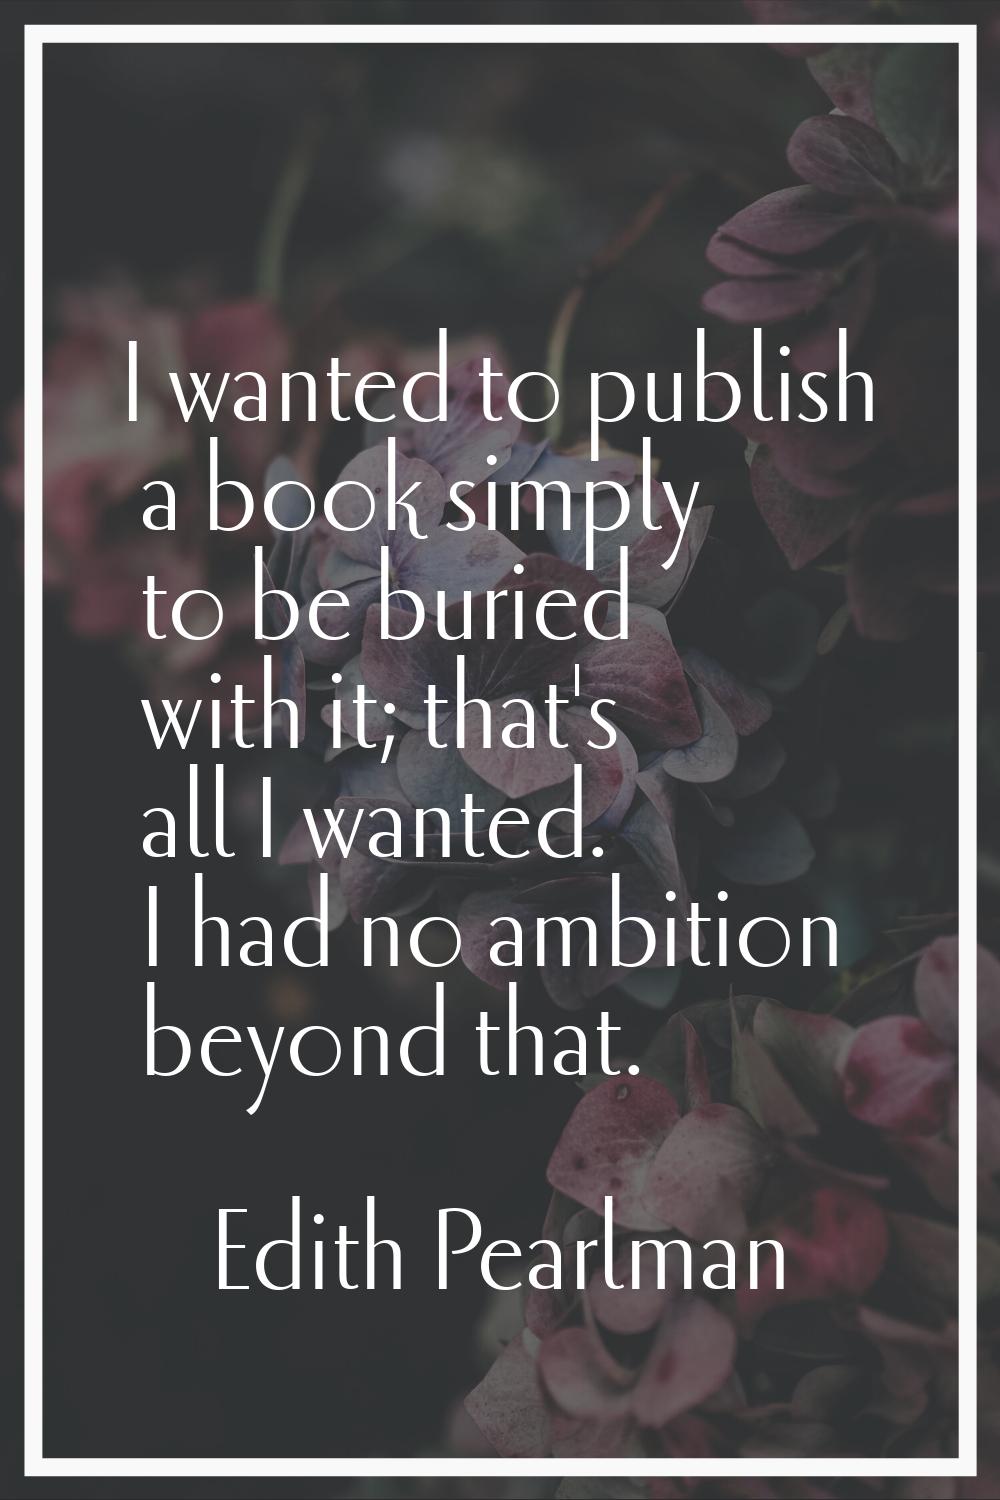 I wanted to publish a book simply to be buried with it; that's all I wanted. I had no ambition beyo